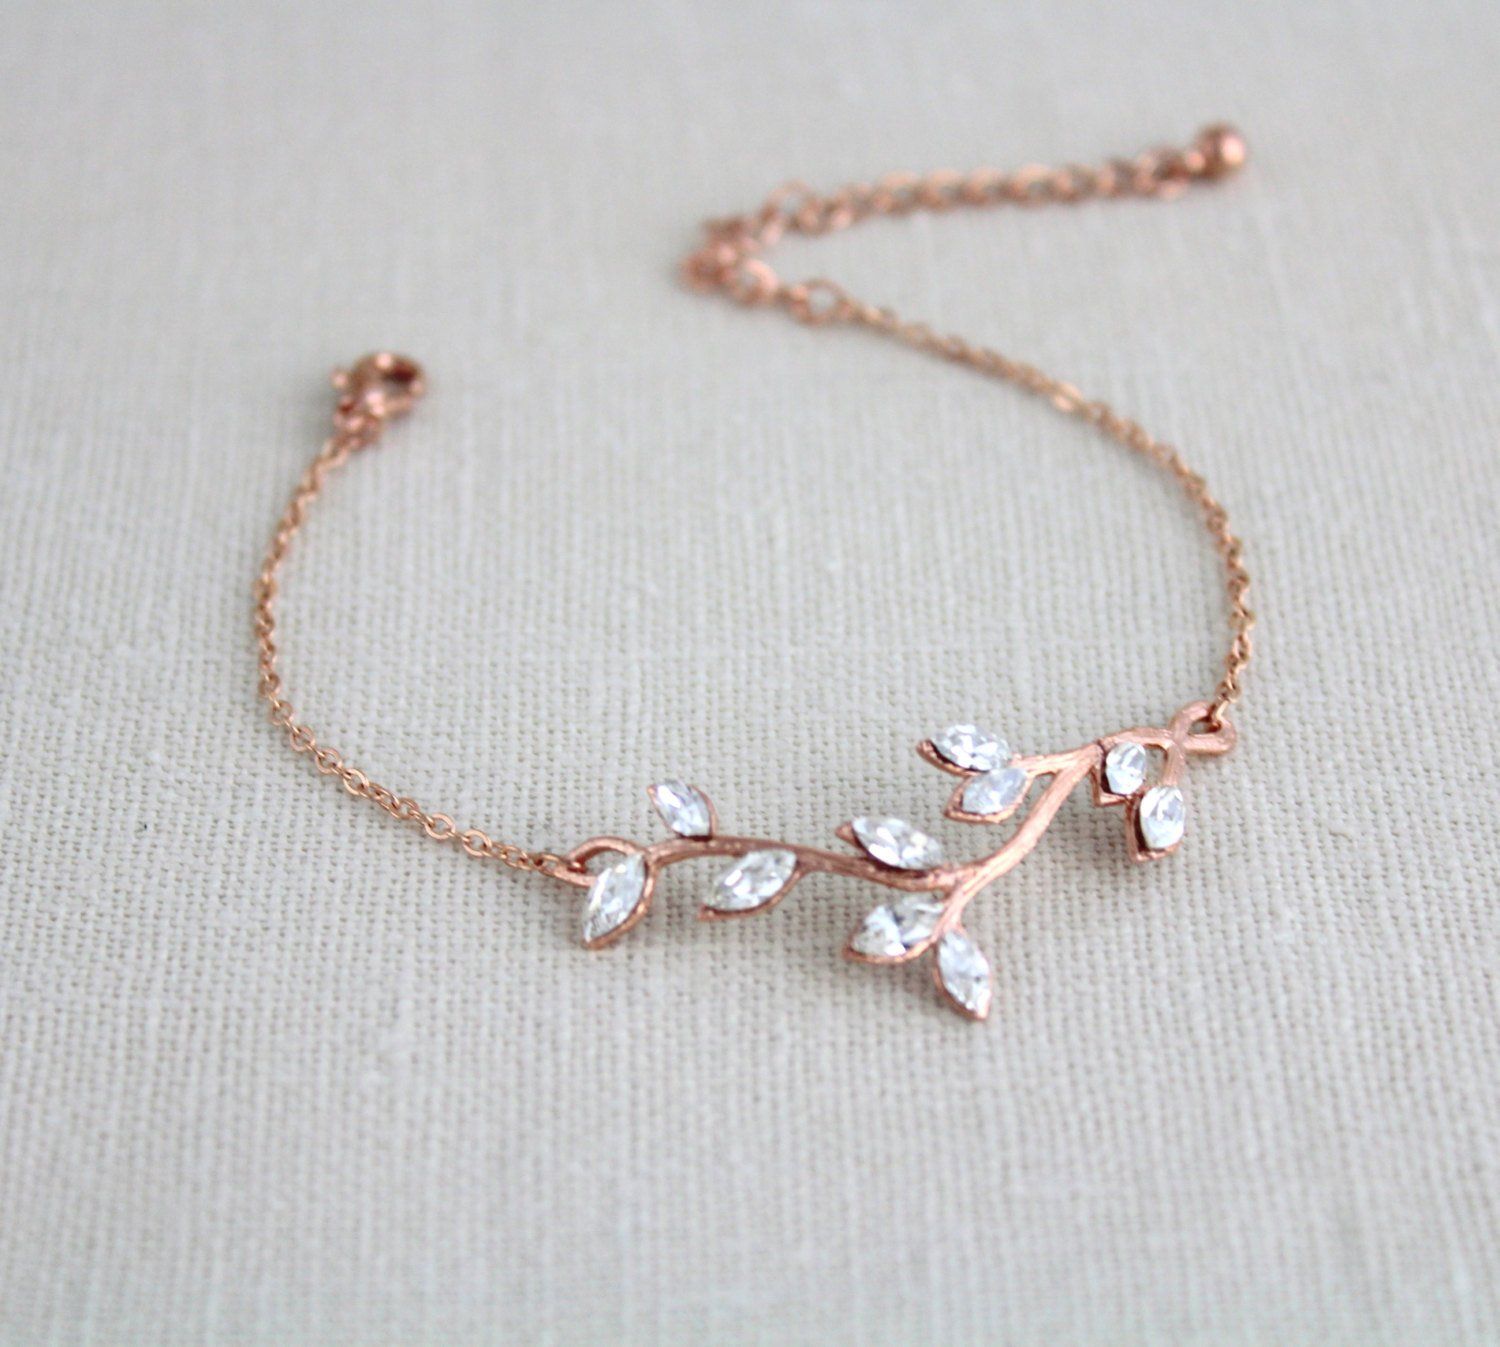 Add the perfect rose gold bangle bracelet to your style